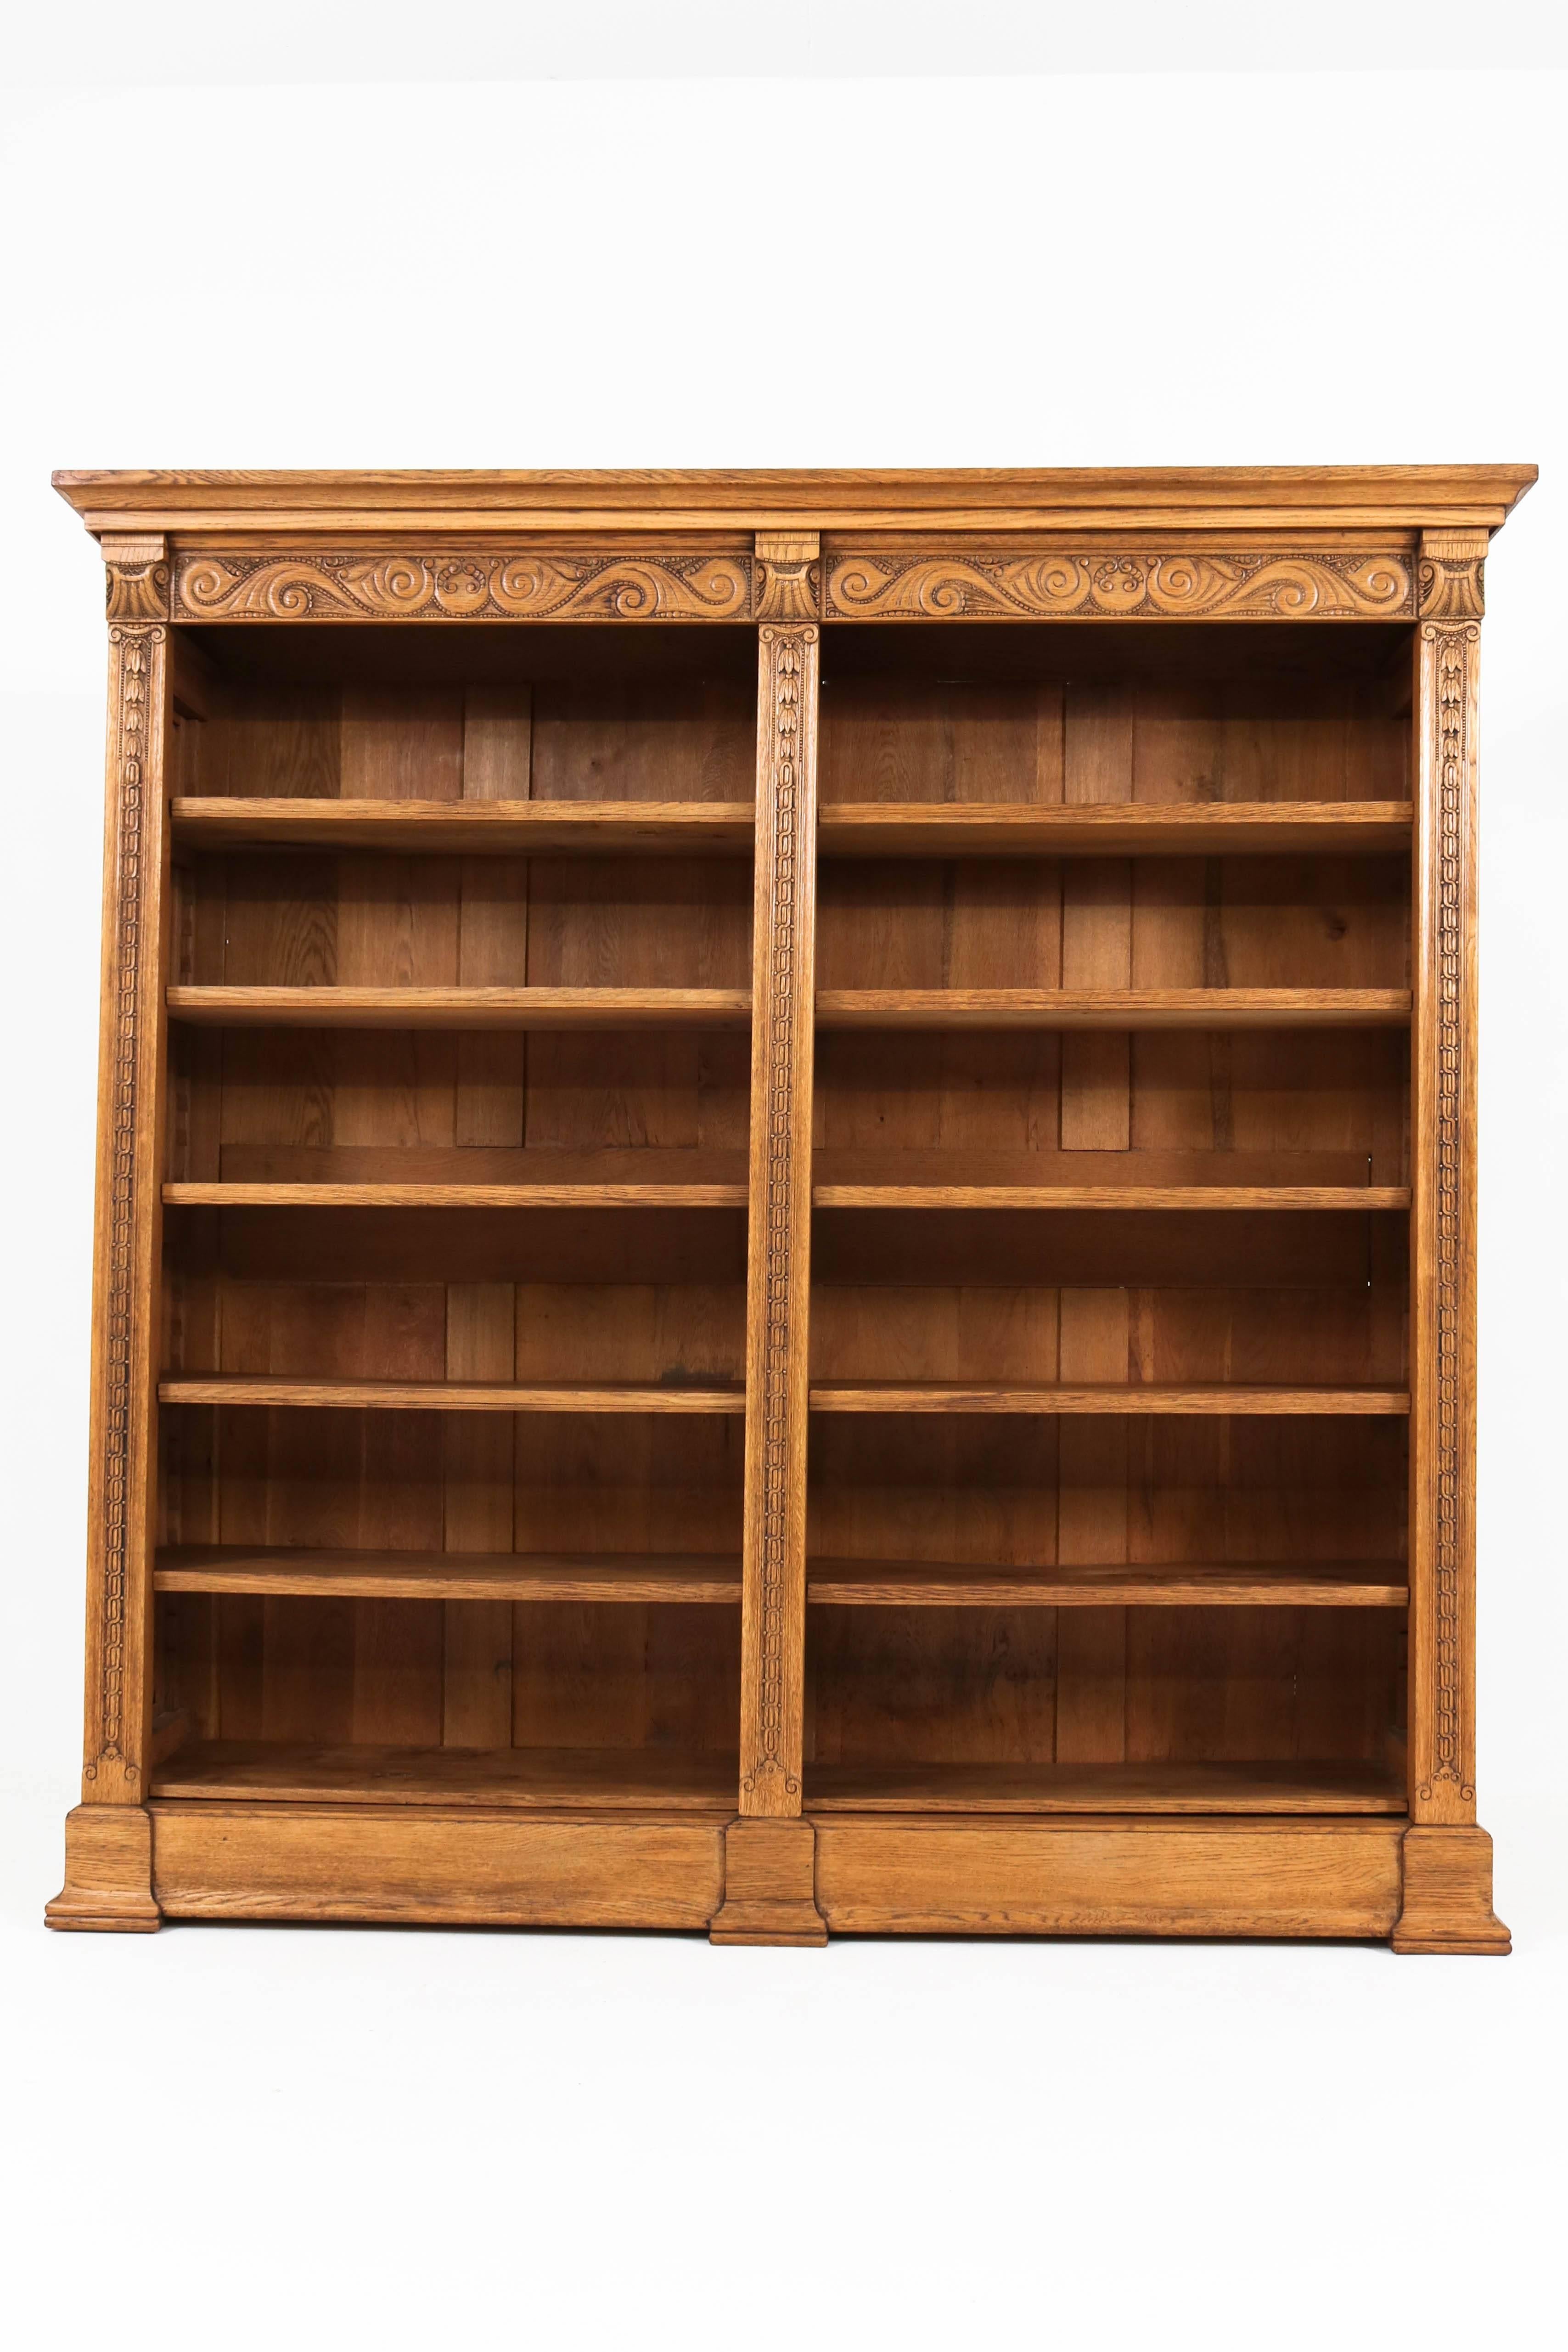 Impressive Dutch Art Nouveau open bookcase, 1900s.
Solid oak with fine carving.
Ten original adjustable wooden shelves.
This bookcase can be dismantled.
In good original condition with minor wear consistent with age and use,
preserving a